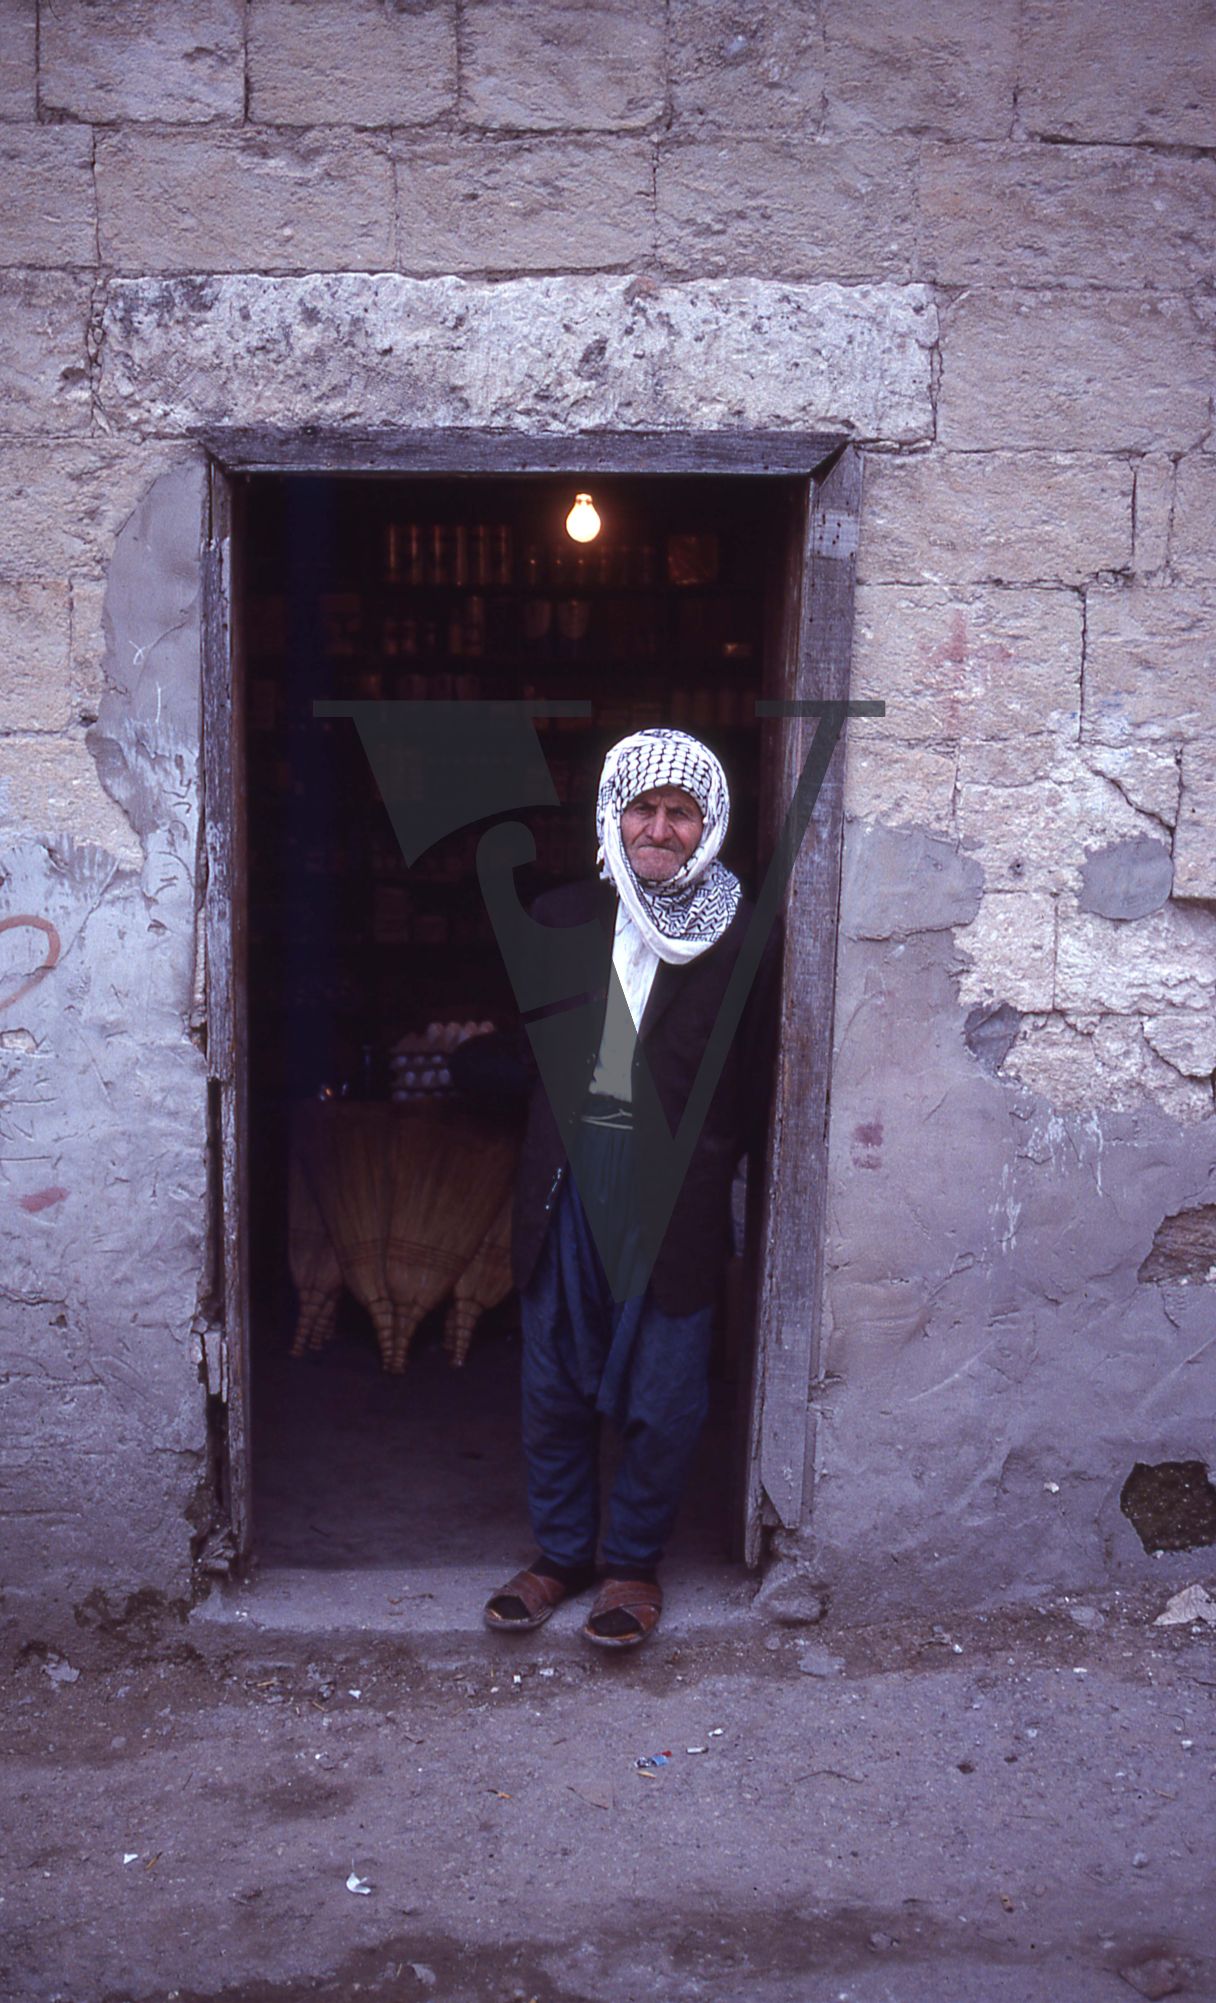 Lebanon, South of Beirut, man in keffiyeh stands outside shop, portrait.